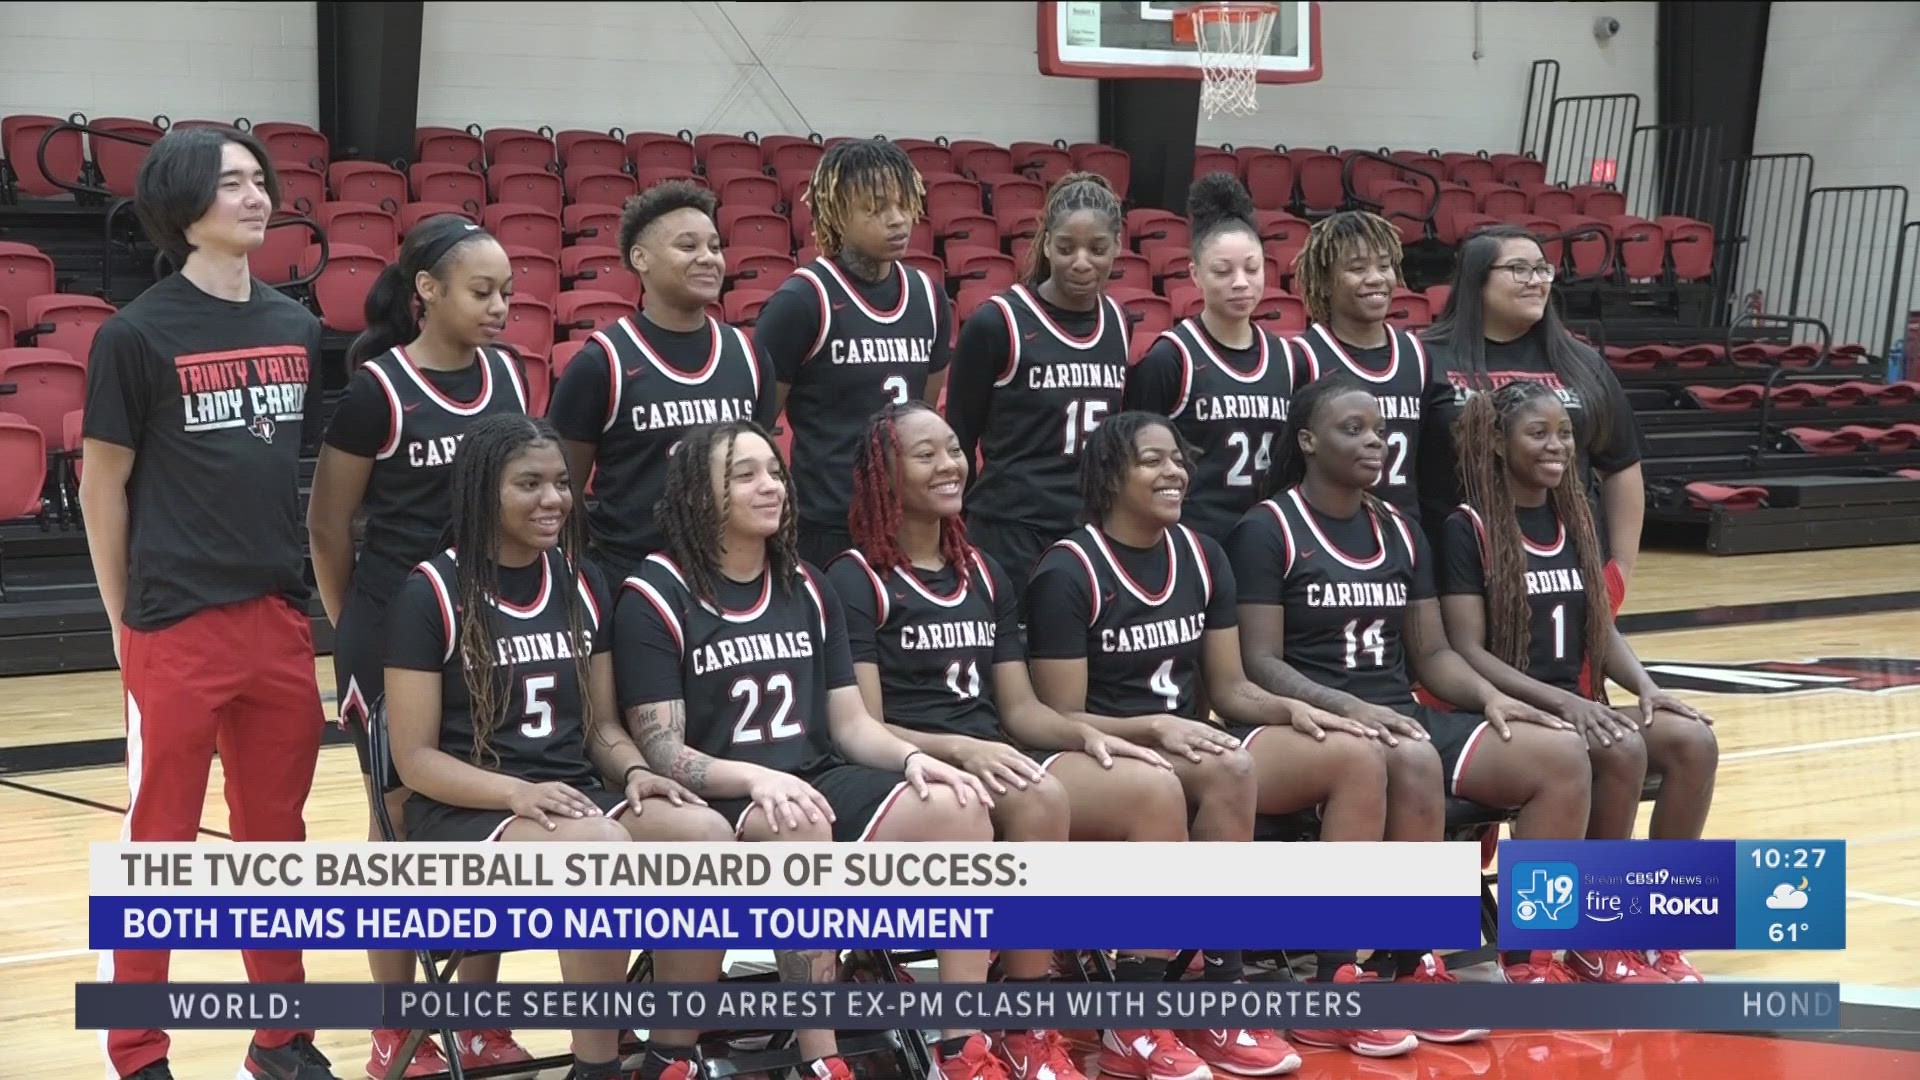 Trinity Valley basketball maintaining their standard of success